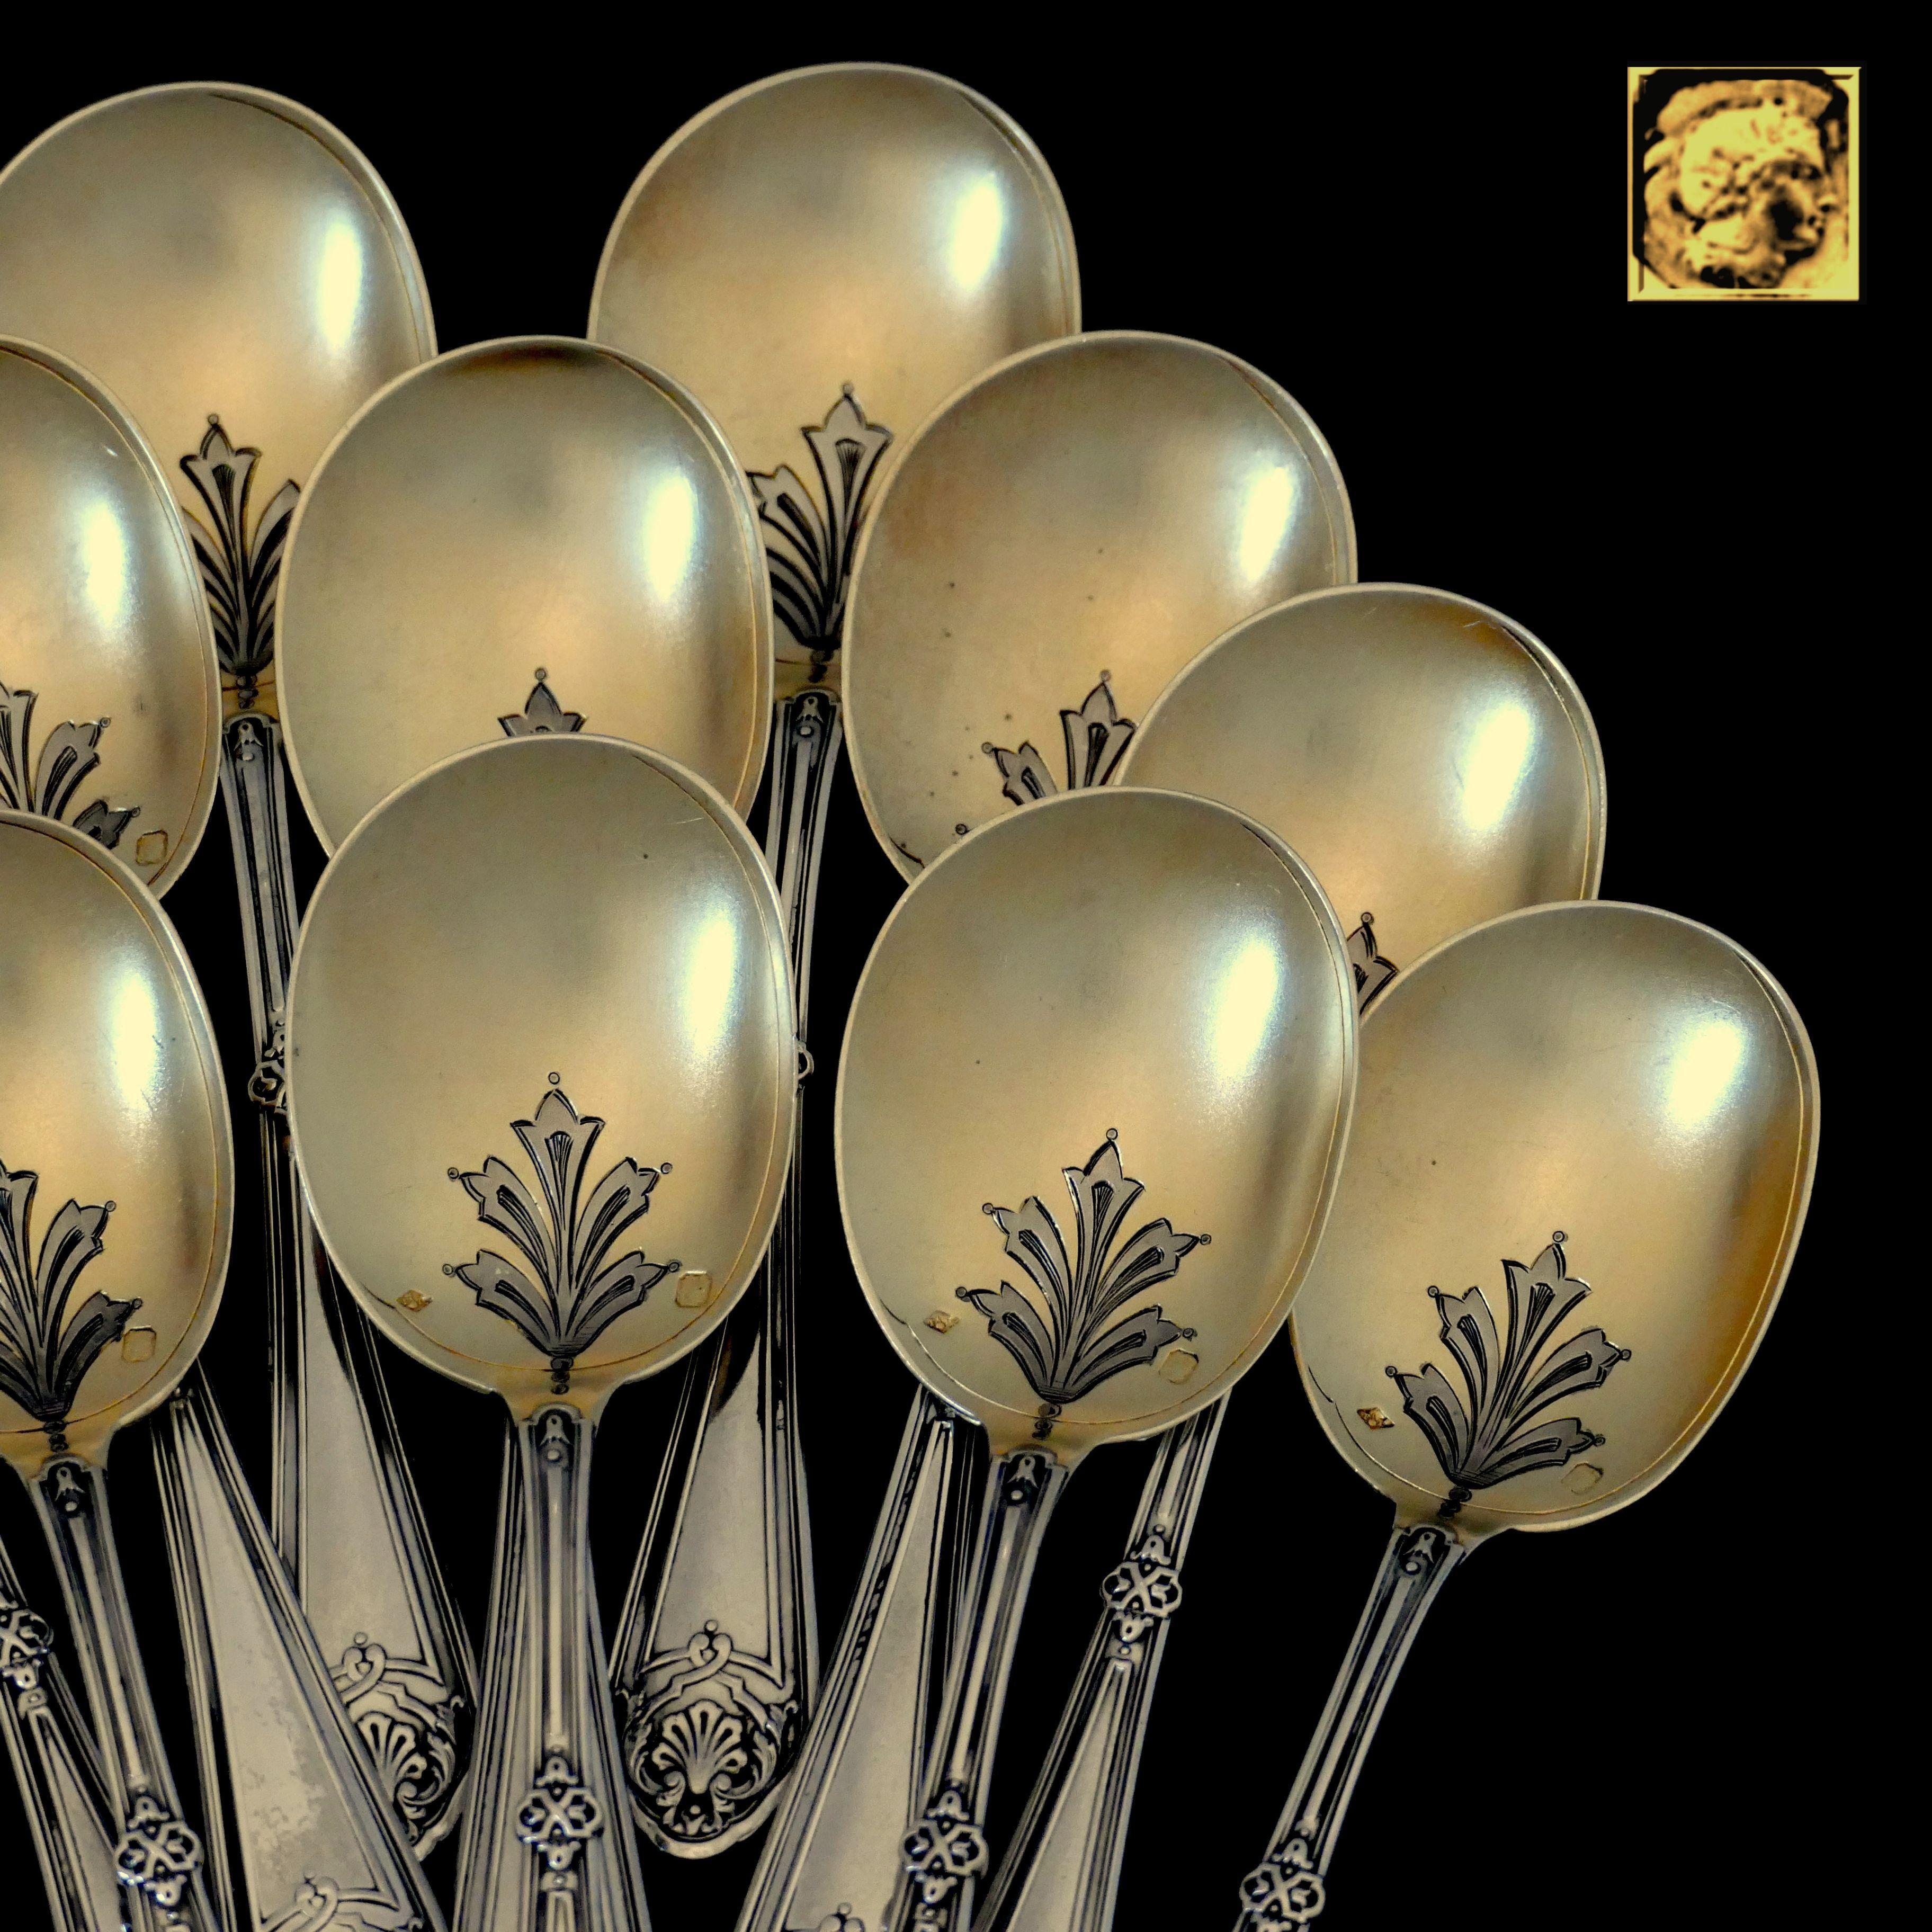 Early 20th Century Labat French Sterling Silver 18k Gold Ice Cream Spoons Set 12 Pc, Original Box